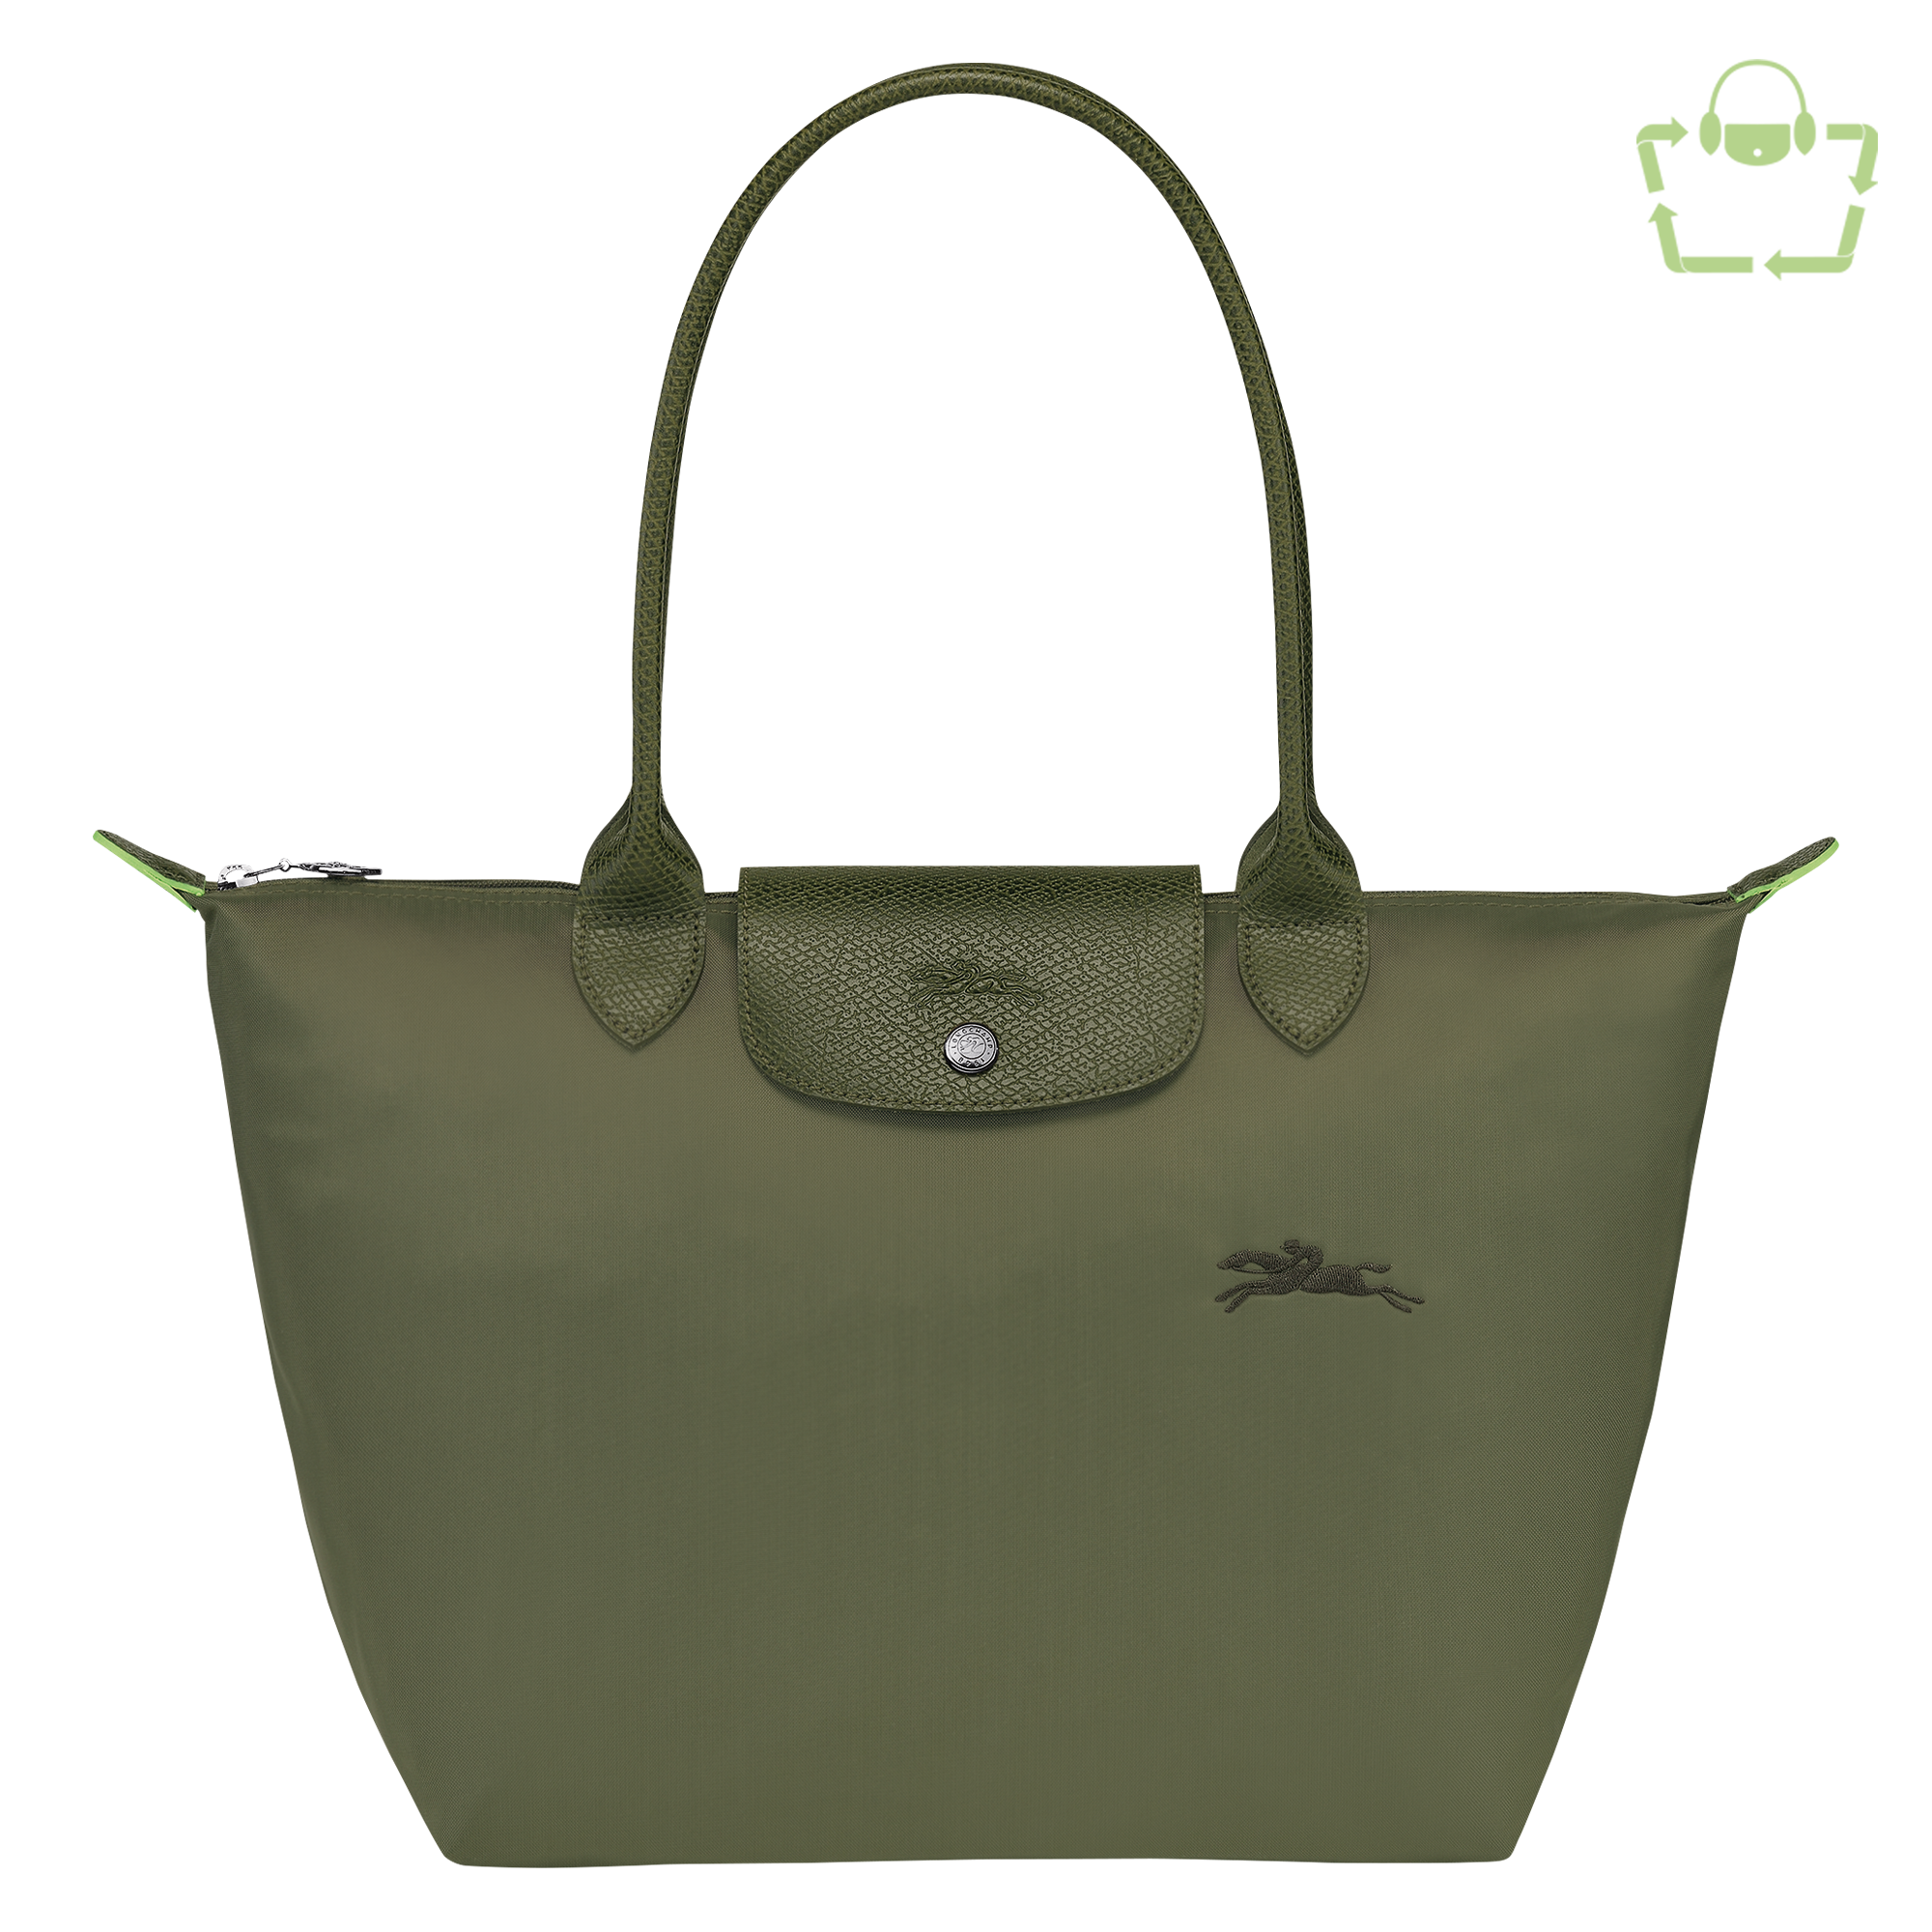 Longchamp LE PLIAGE GREEN - Tote bag M in Forest - 1 (SKU: L2605919479)